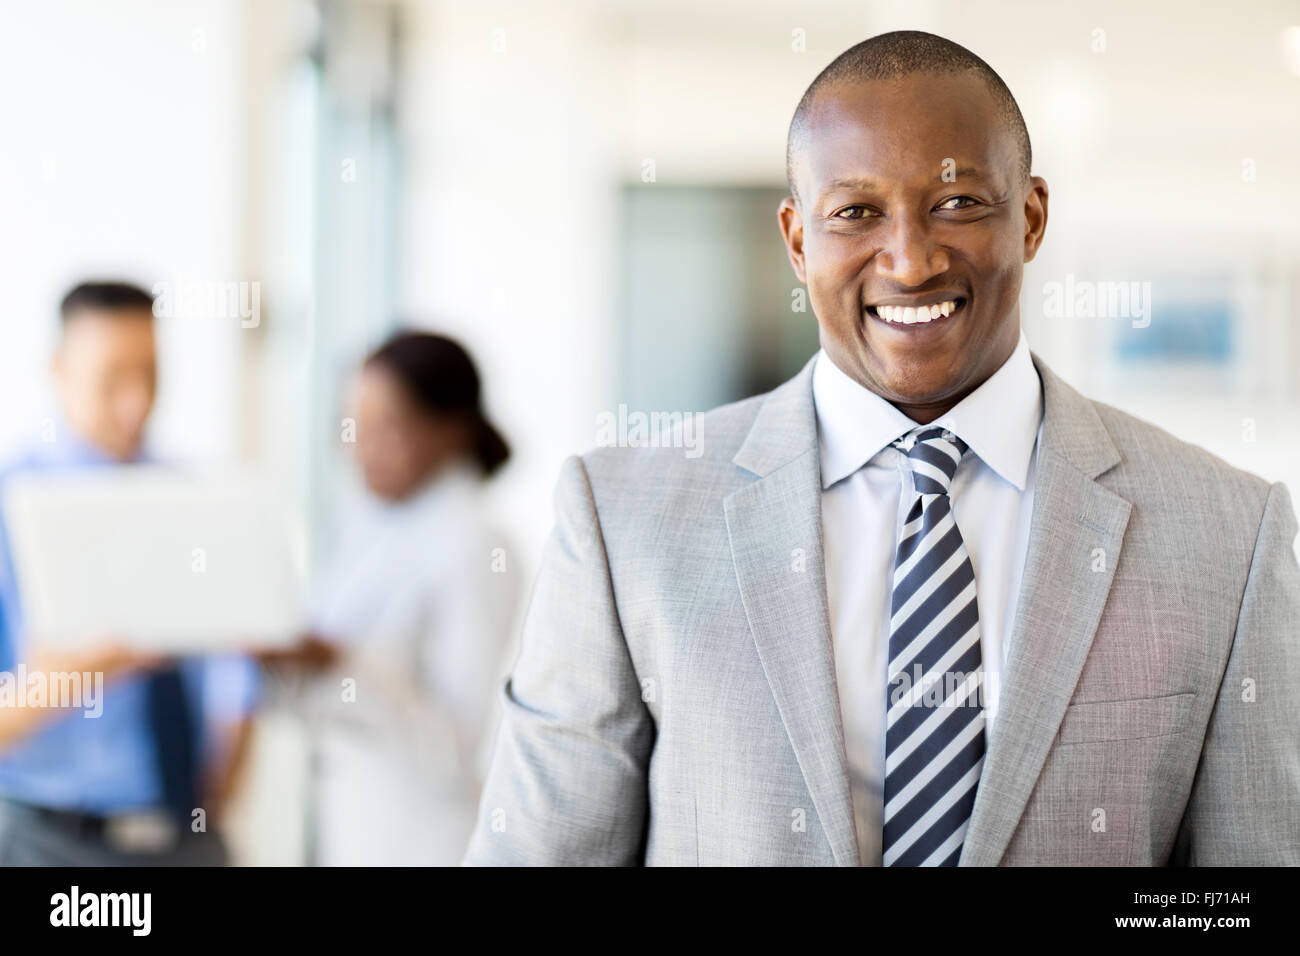 good looking African American business executive Stock Photo